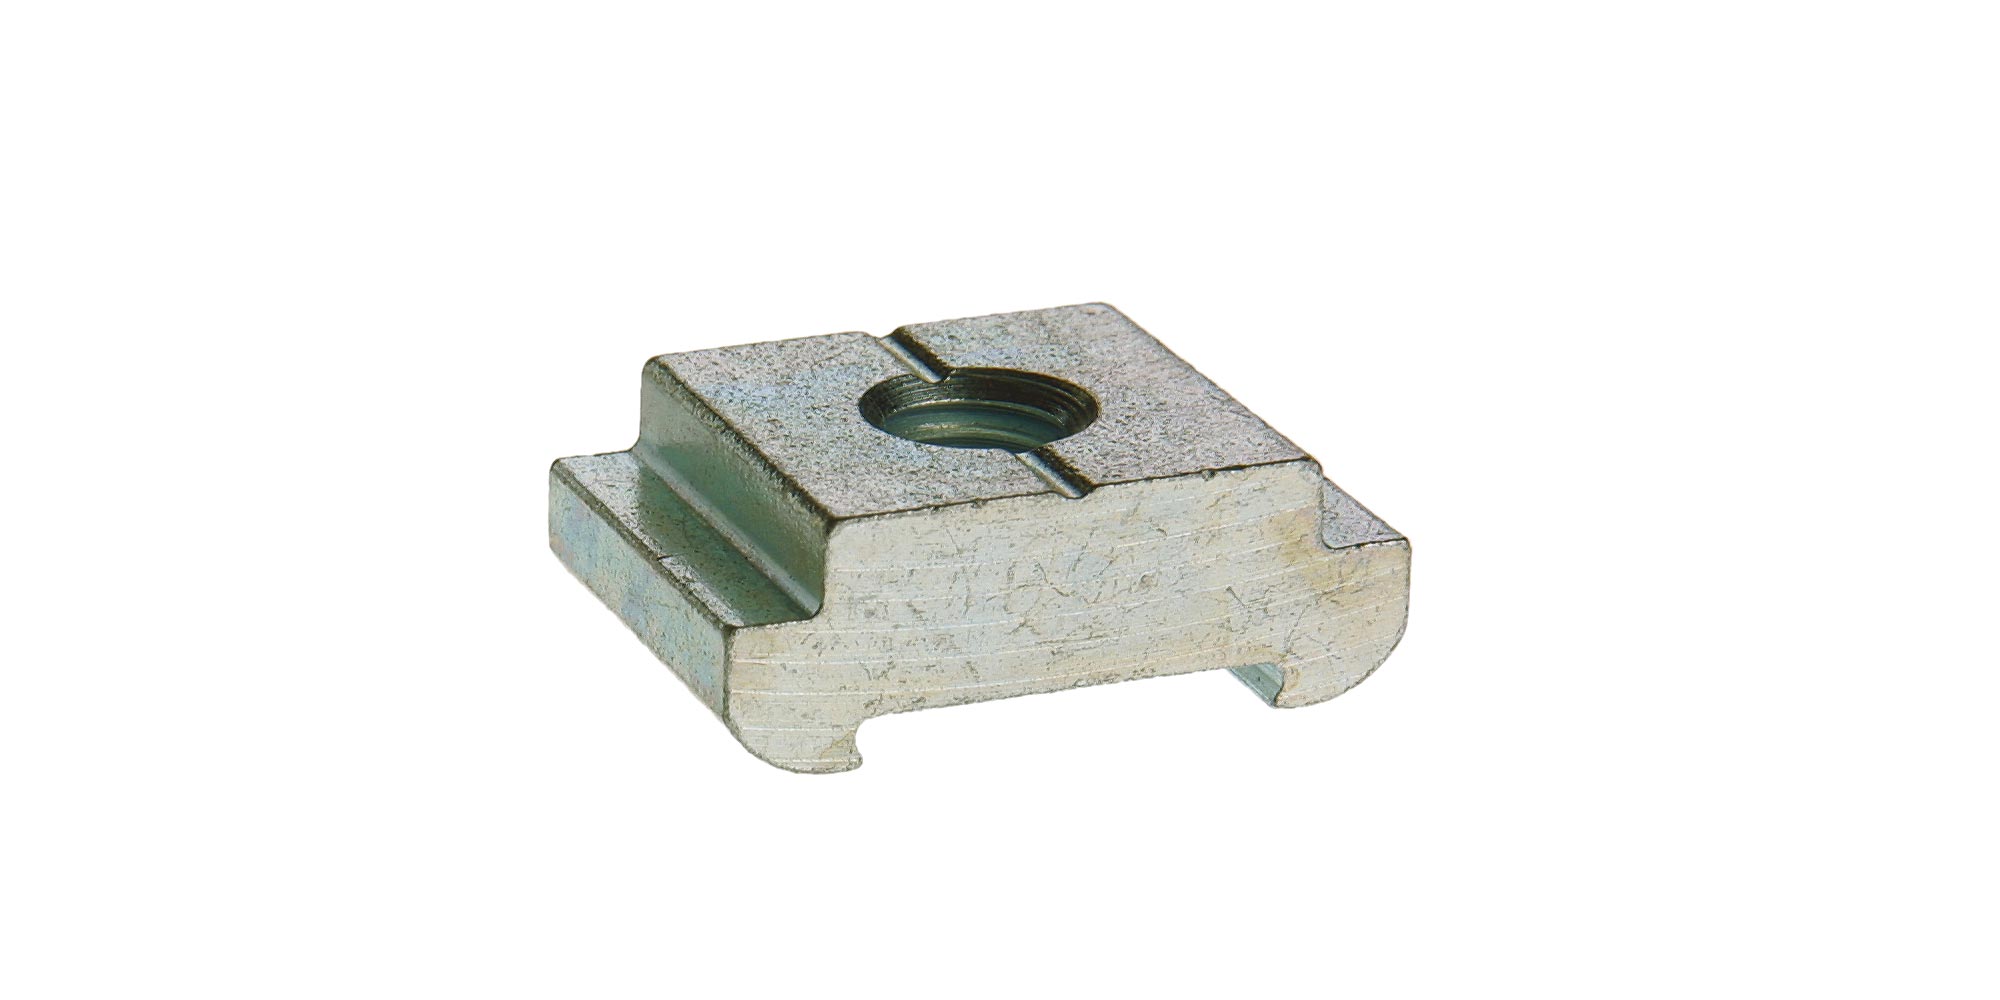 Sliding blocks C30 M8 galvanized steel, without screw, without spring